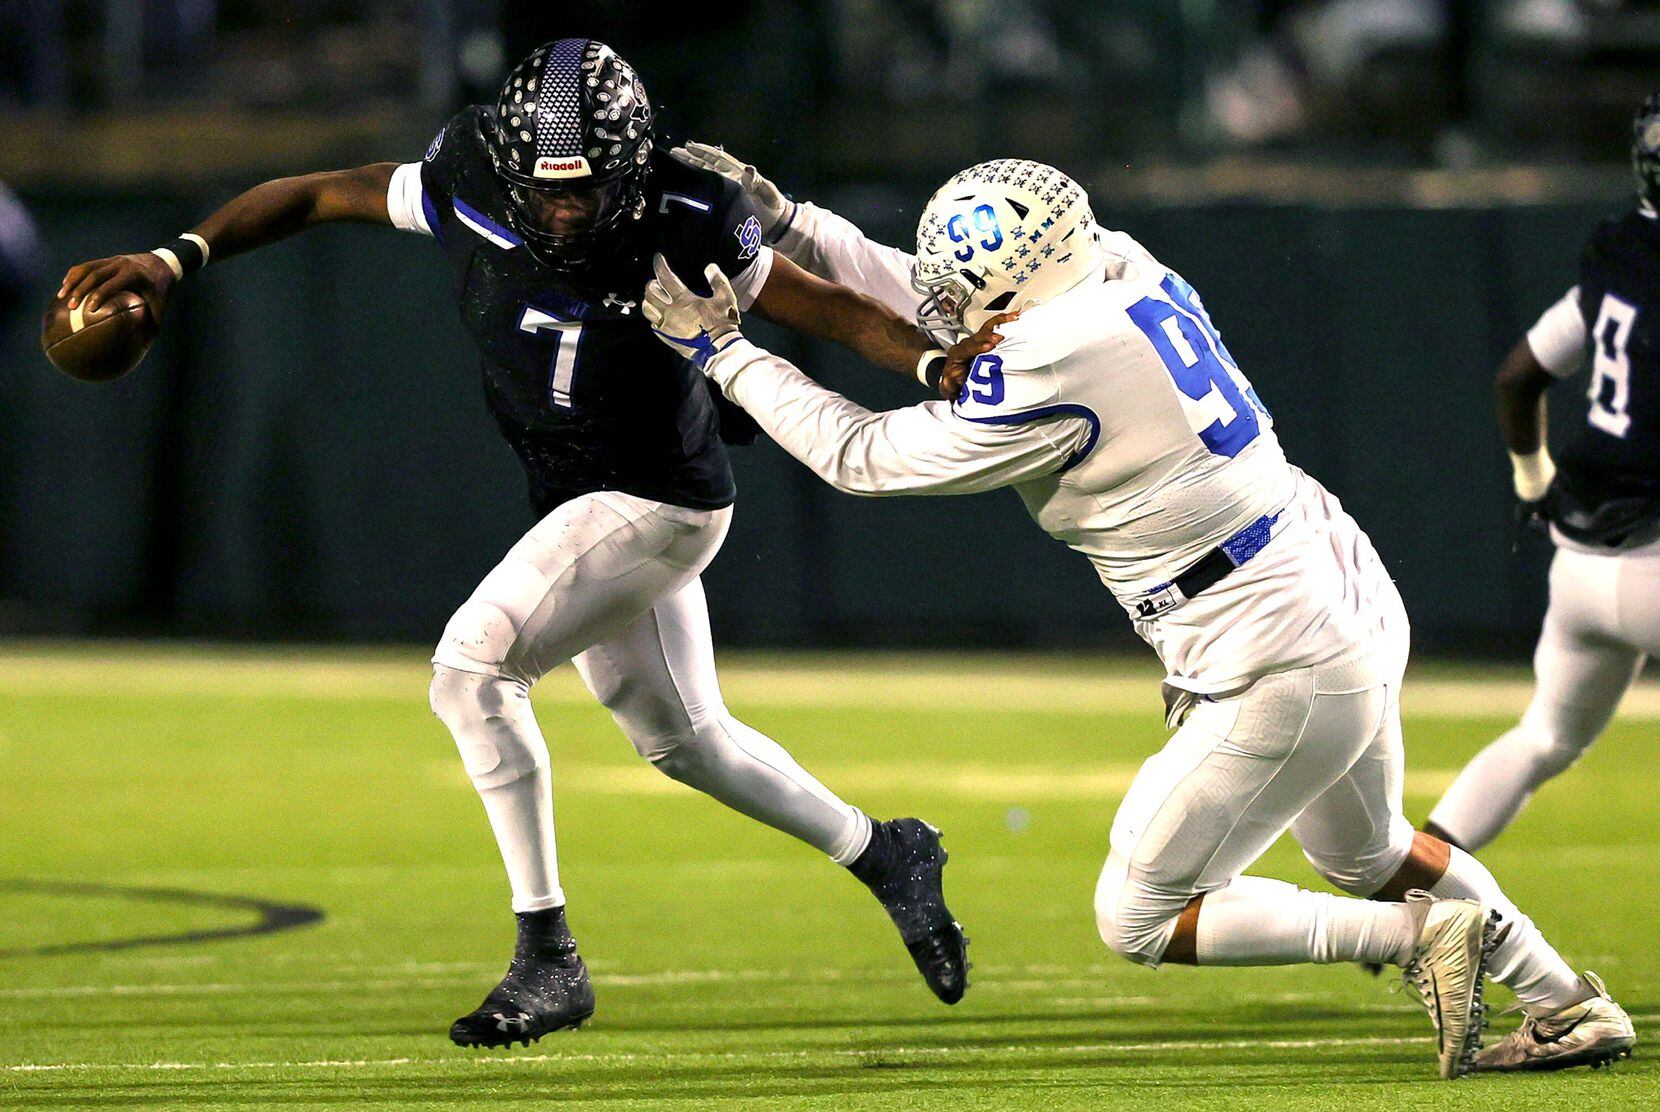 Mansfield Summit quarterback David Hopkins (7) tries to break free from Midlothian defensive lineman Kade Tompkins (99) during the first half of the 5A Division I Region I semifinal high school football playoff game played on November 26, 2021 at Gopher-Warrior Bowl in Grand Prairie.  (Steve Nurenberg/Special Contributor)